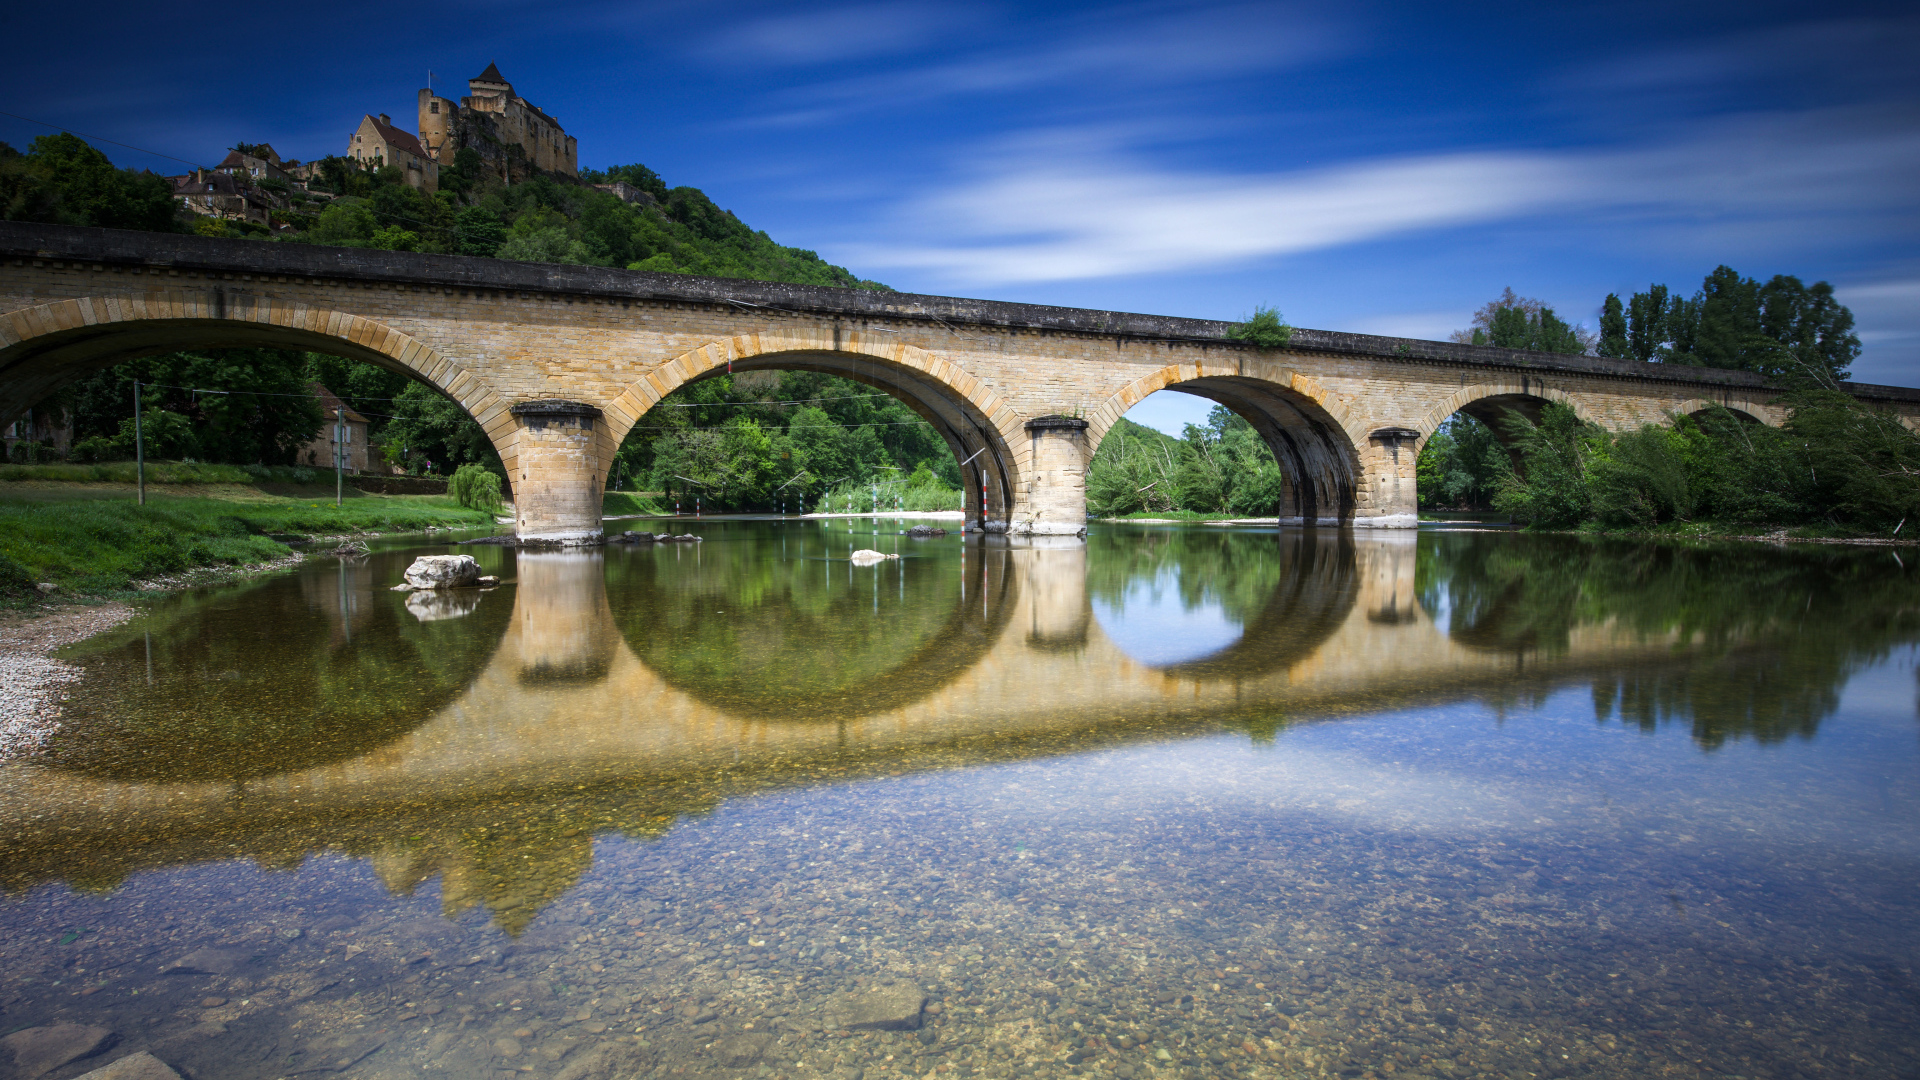 The bridge at the ancient fortress of Castelnau, France